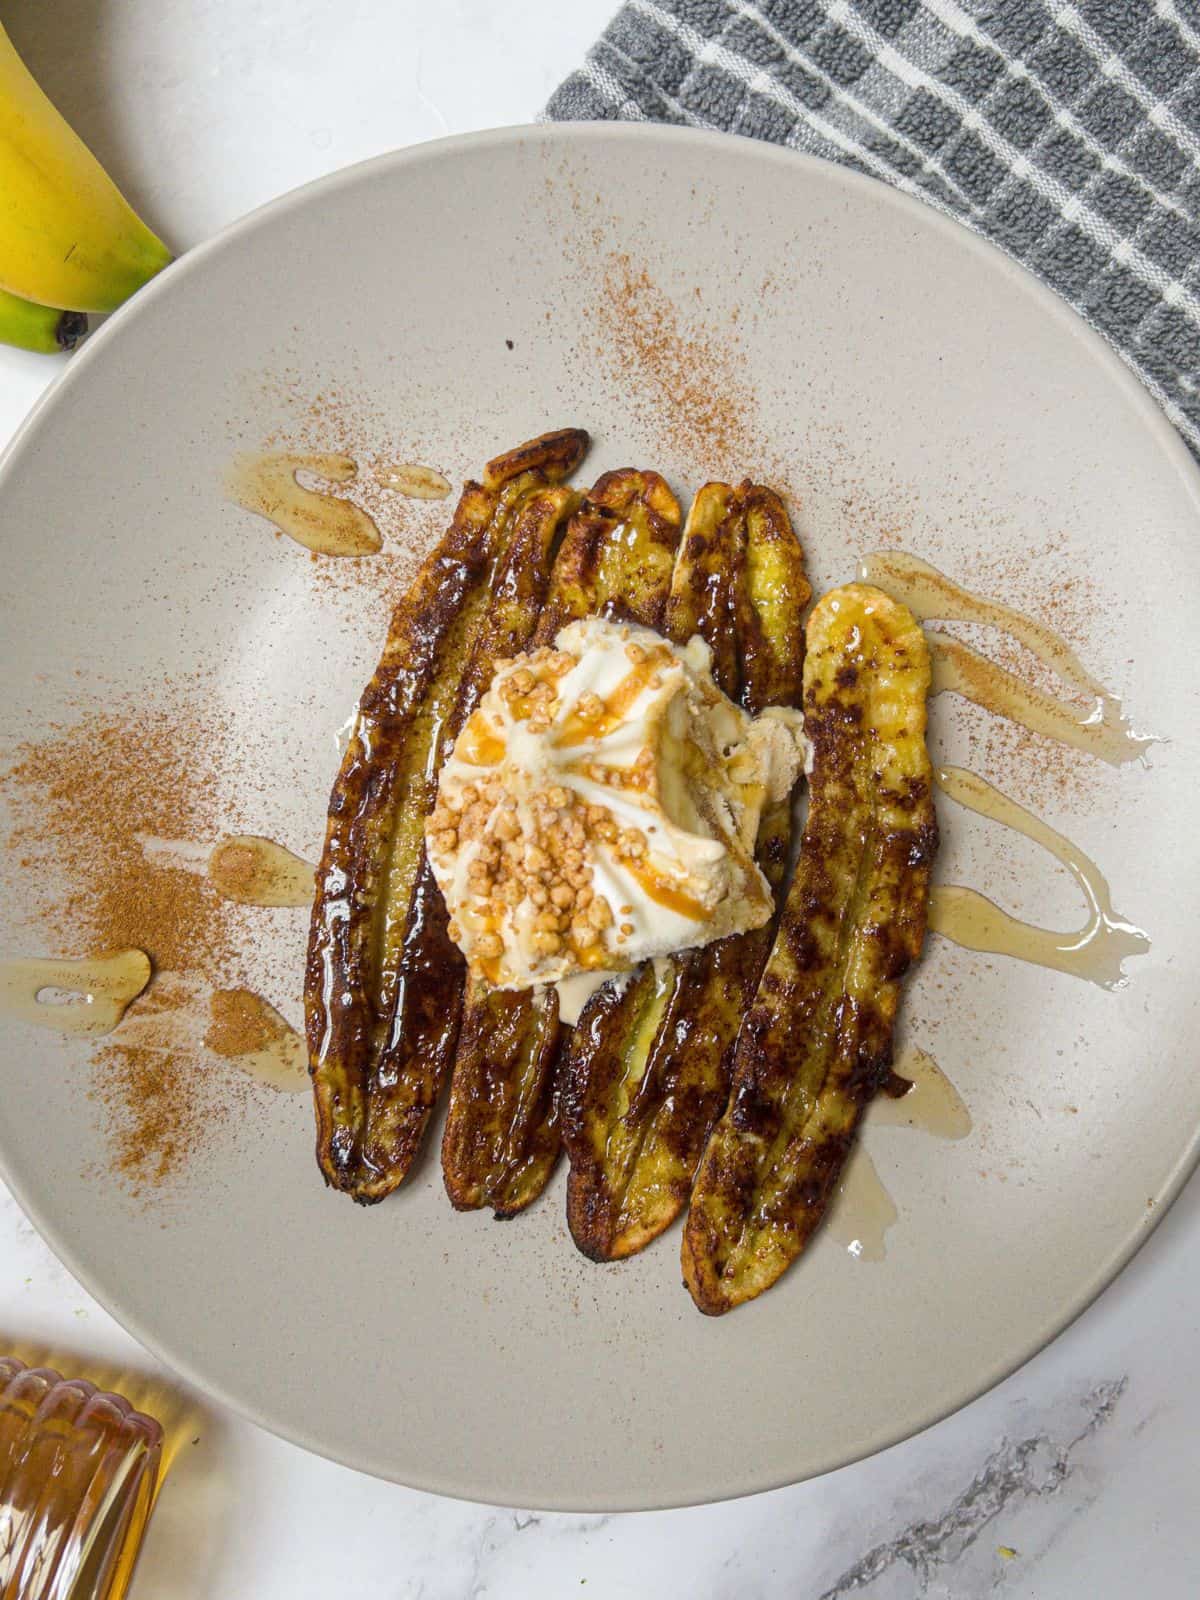 Ice cream with sprinkles sat on top of 4 caramelized bananas on a neutral plate.